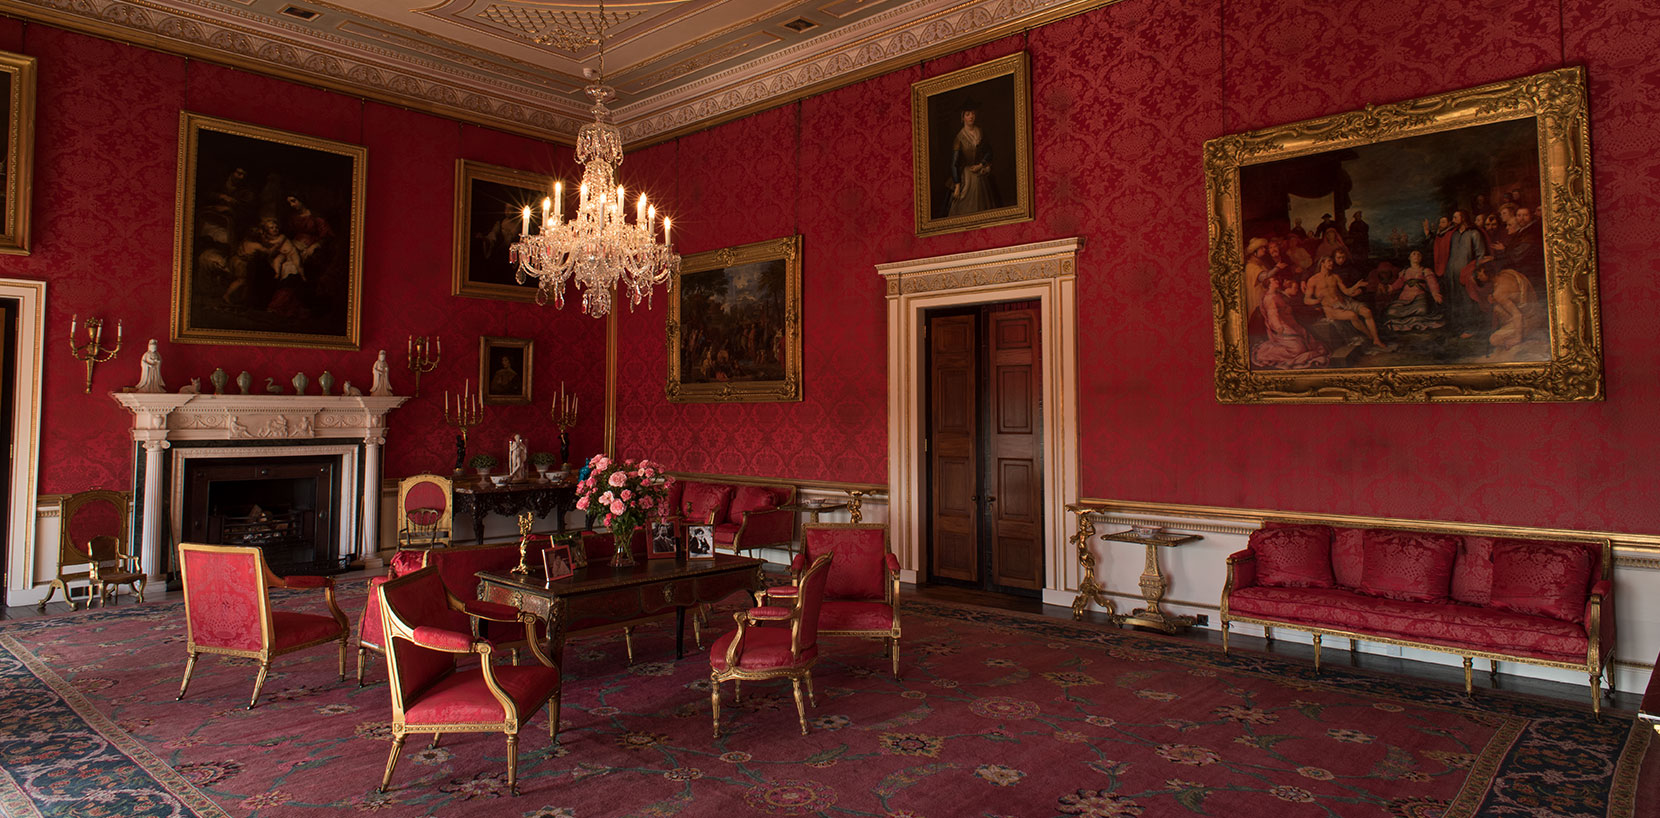 The red saloon at Ragley Hall